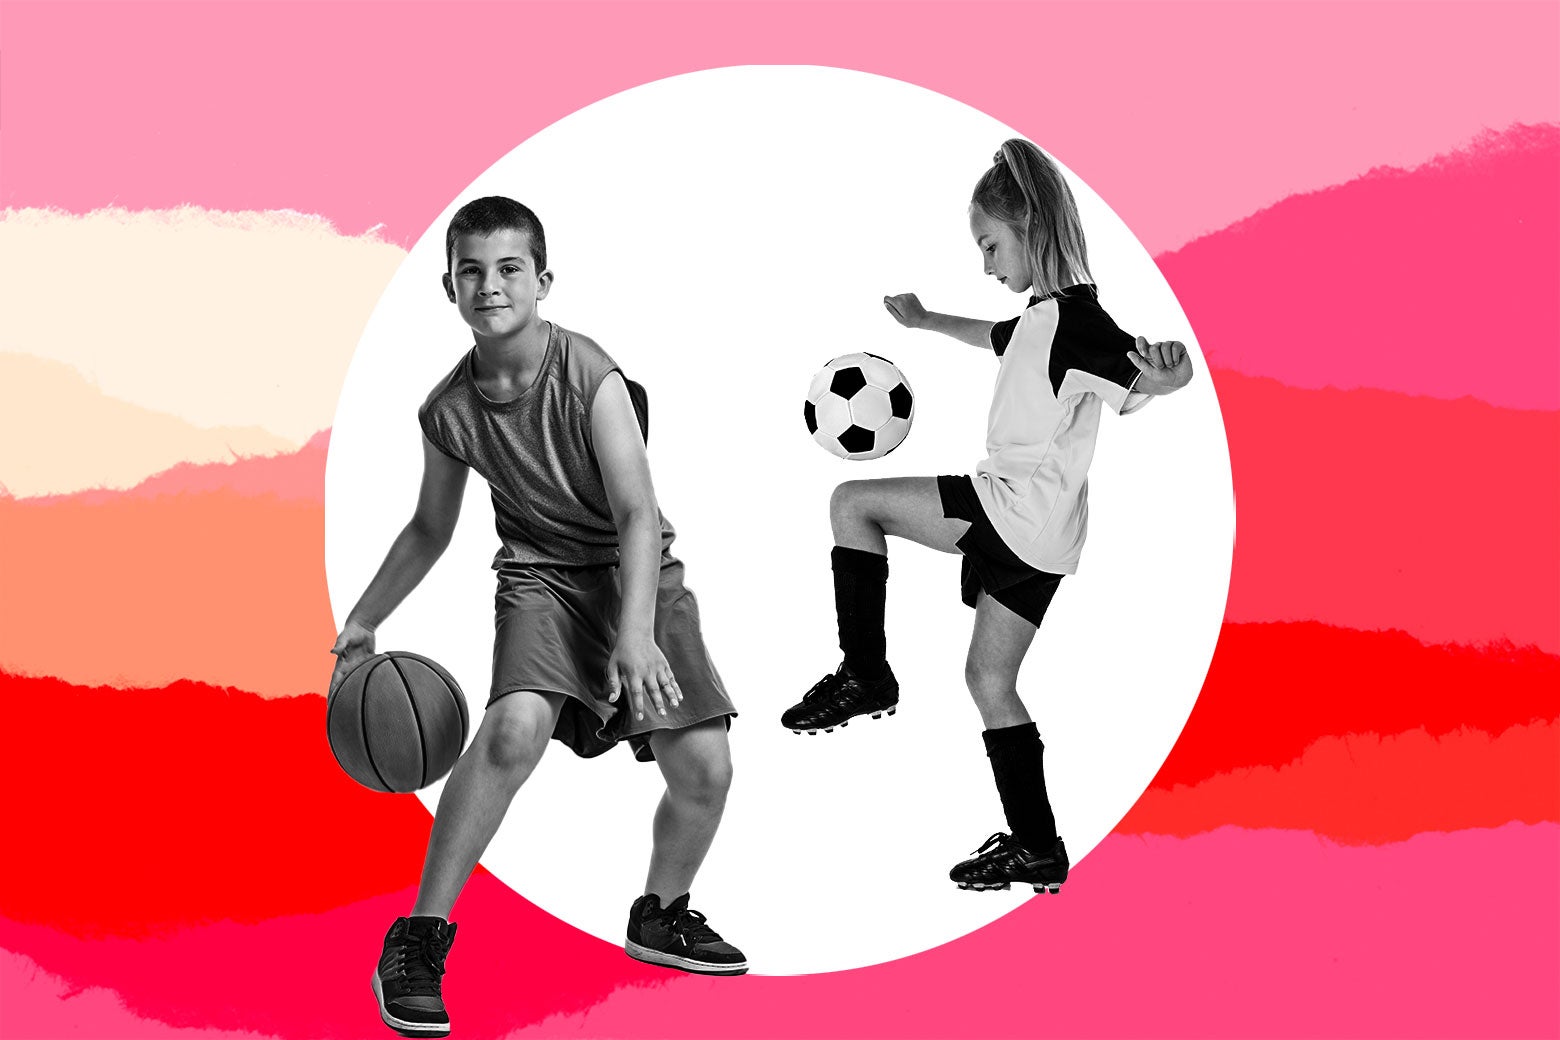 A boy plays basketball and a girl plays soccer.